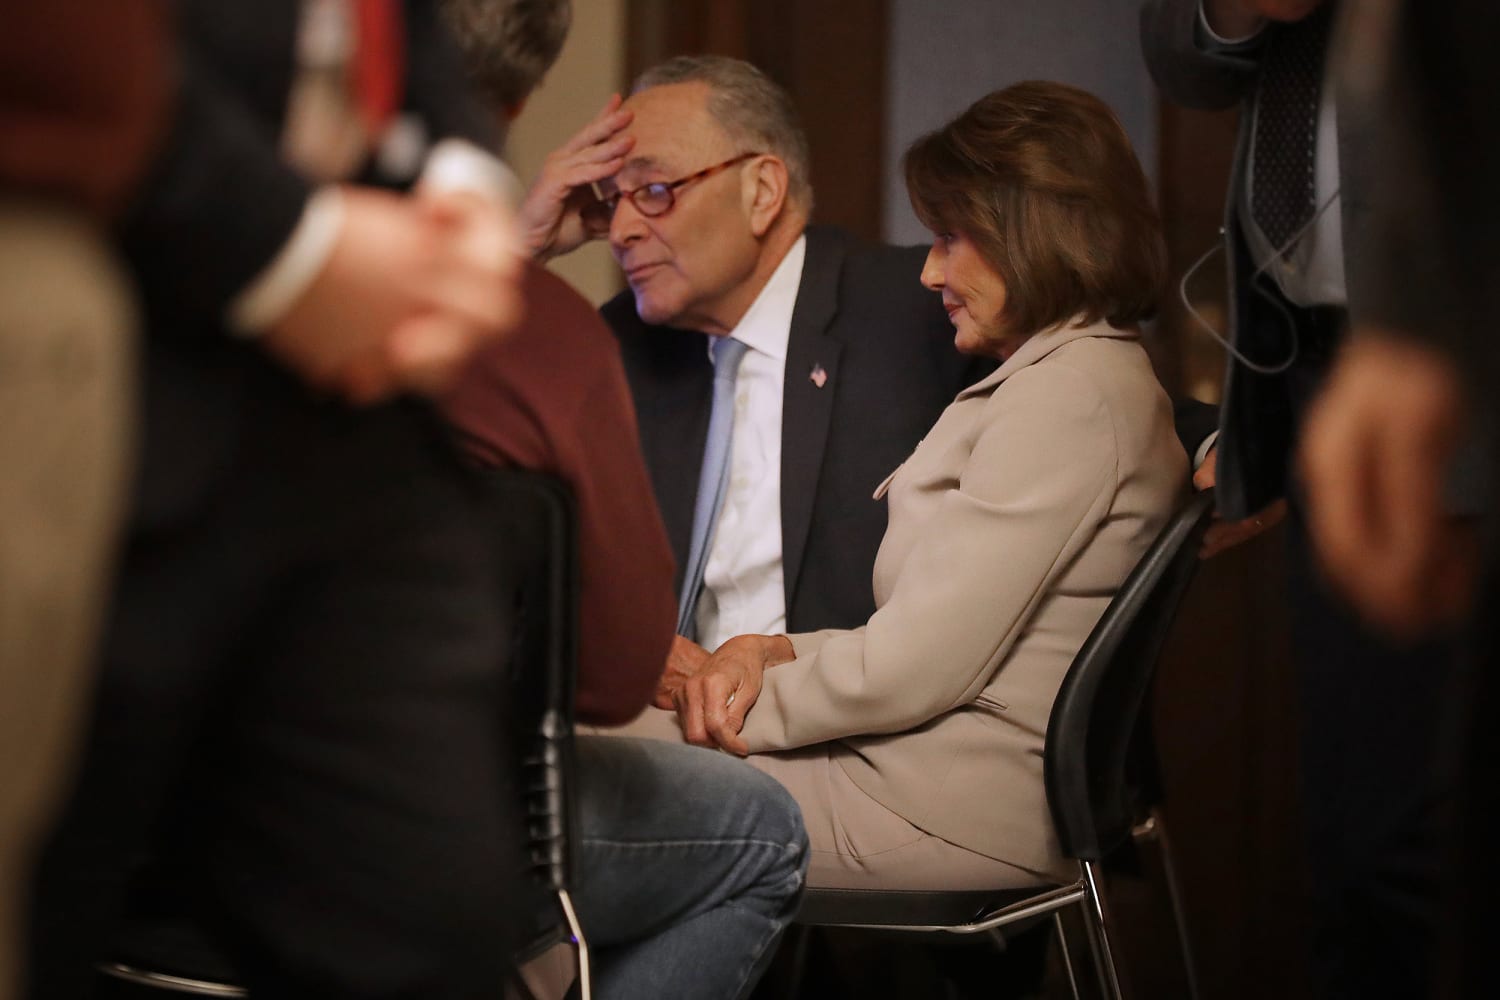 Fact Checking The Democratic Response A Look At The Claims Of Pelosi And Schumer